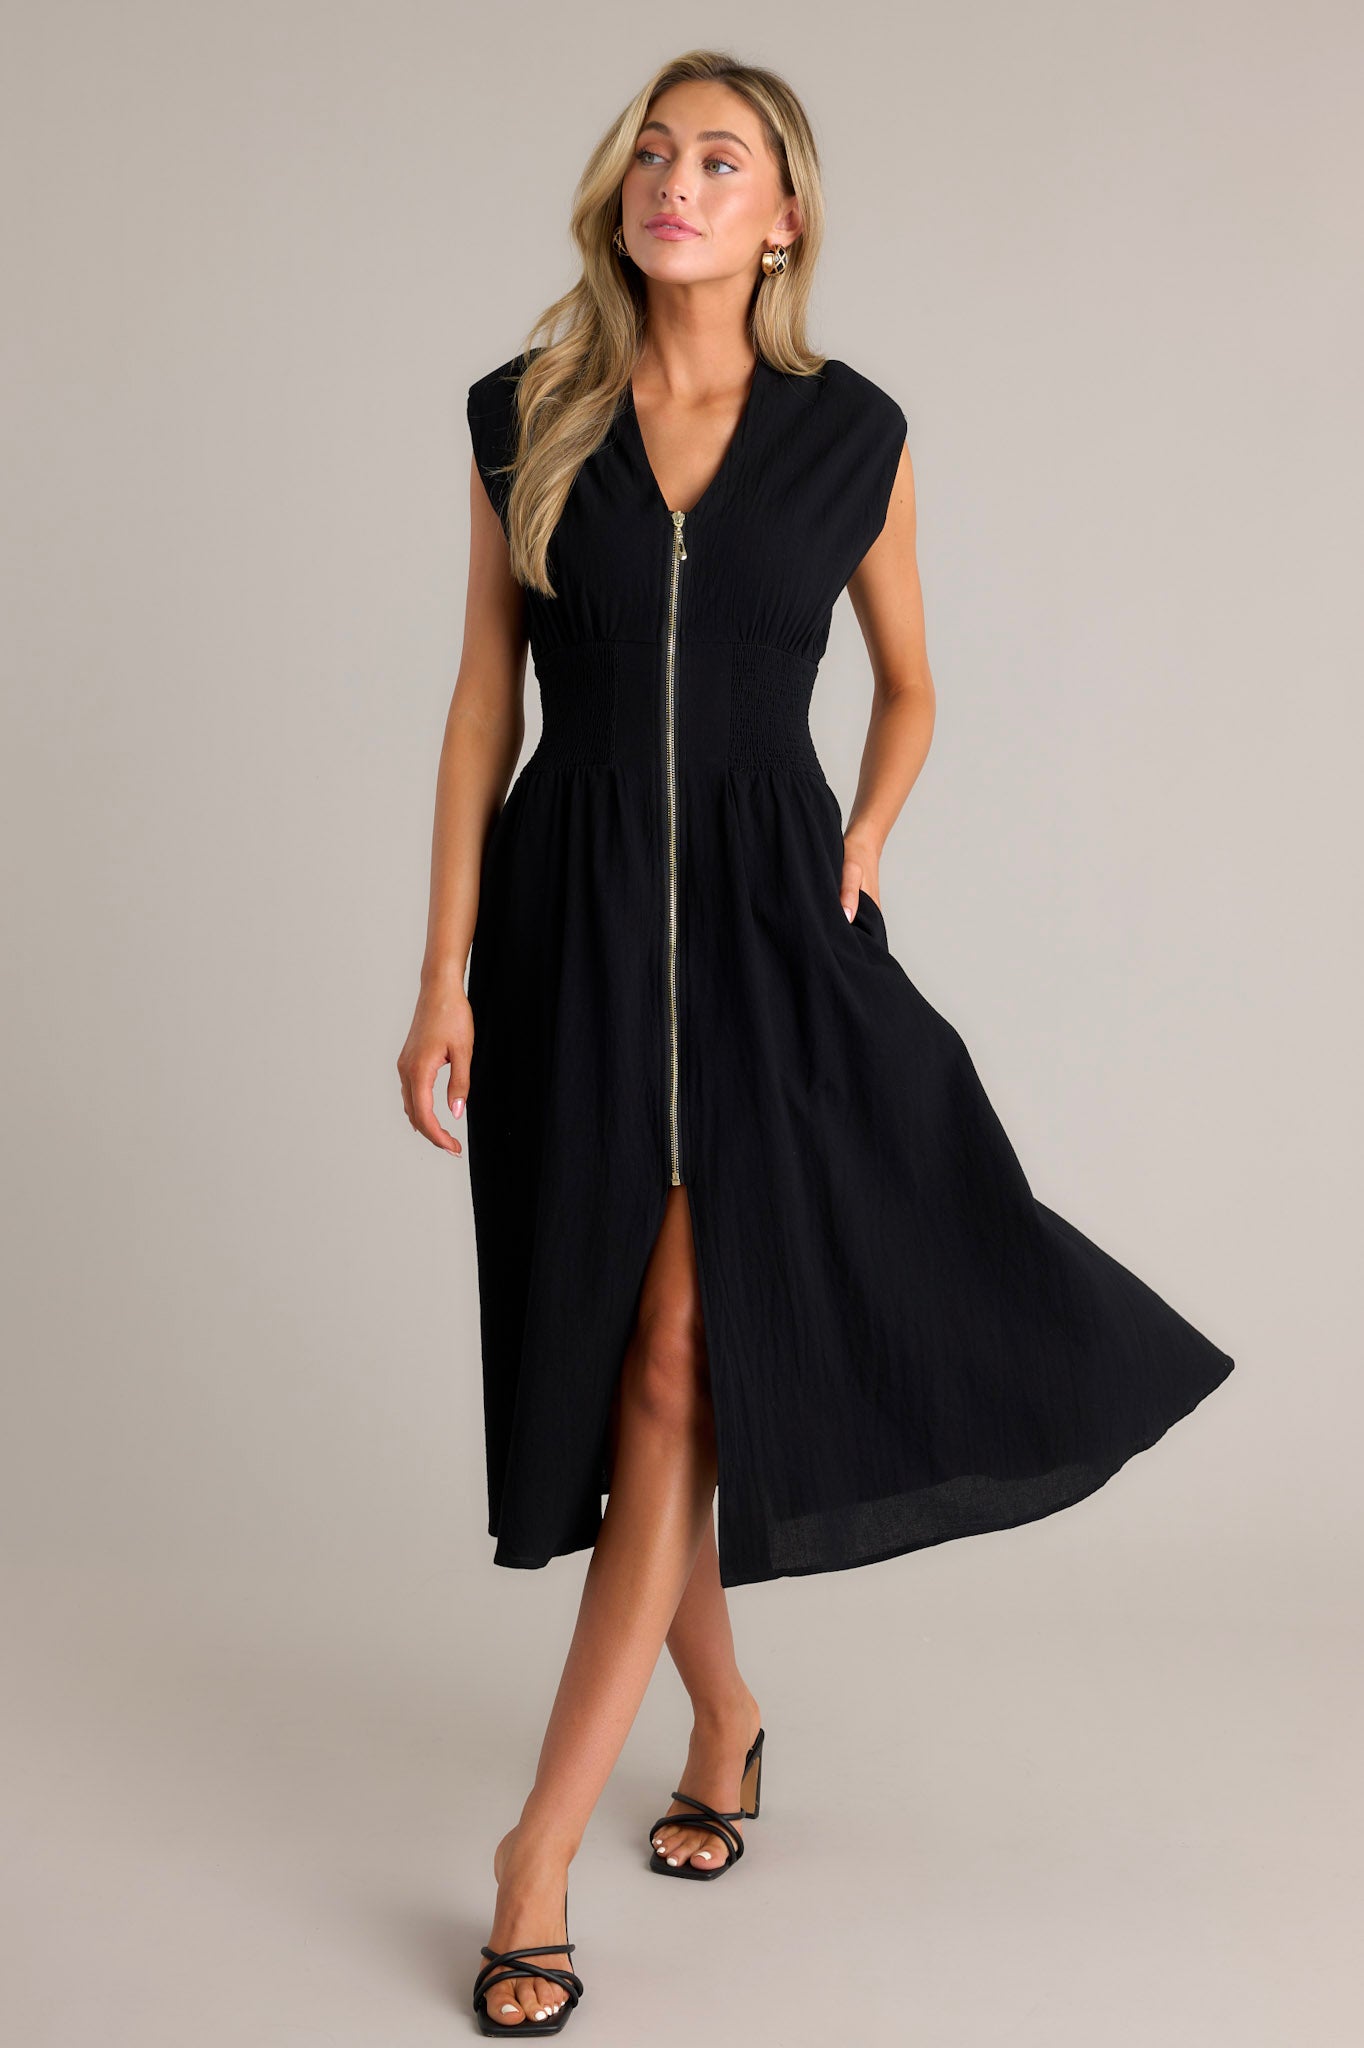 Action shot of a black midi dress displaying the fit and movement, highlighting the deep v-neckline, shoulder padding, functional zipper front, fully smocked waist, functional pockets, and front slit.